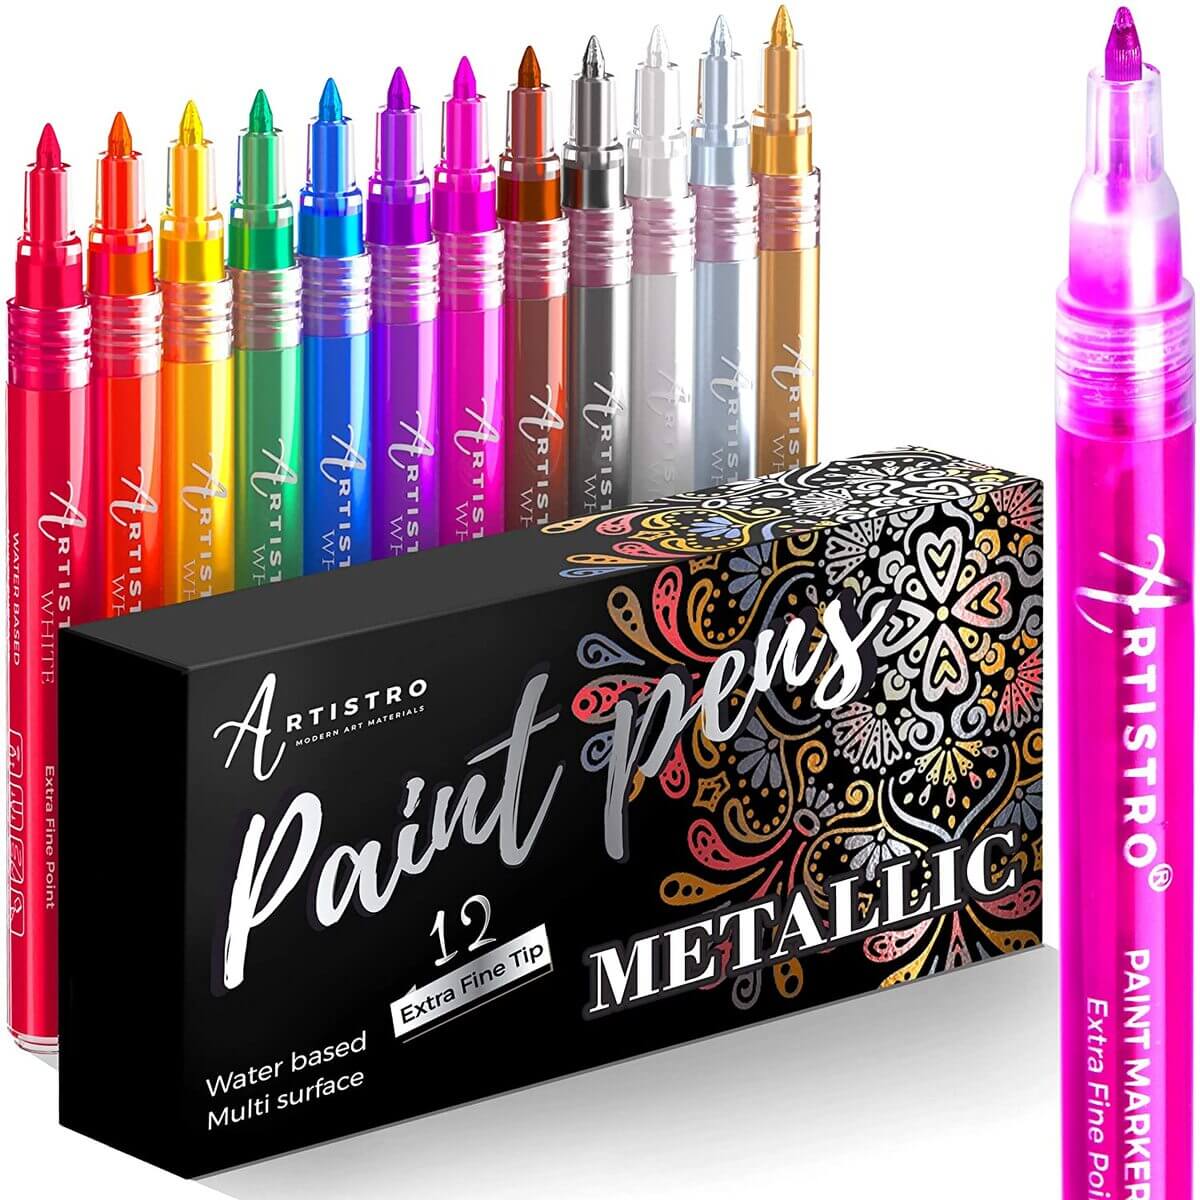 Metallic Paint Marker Pens for Artists for sale